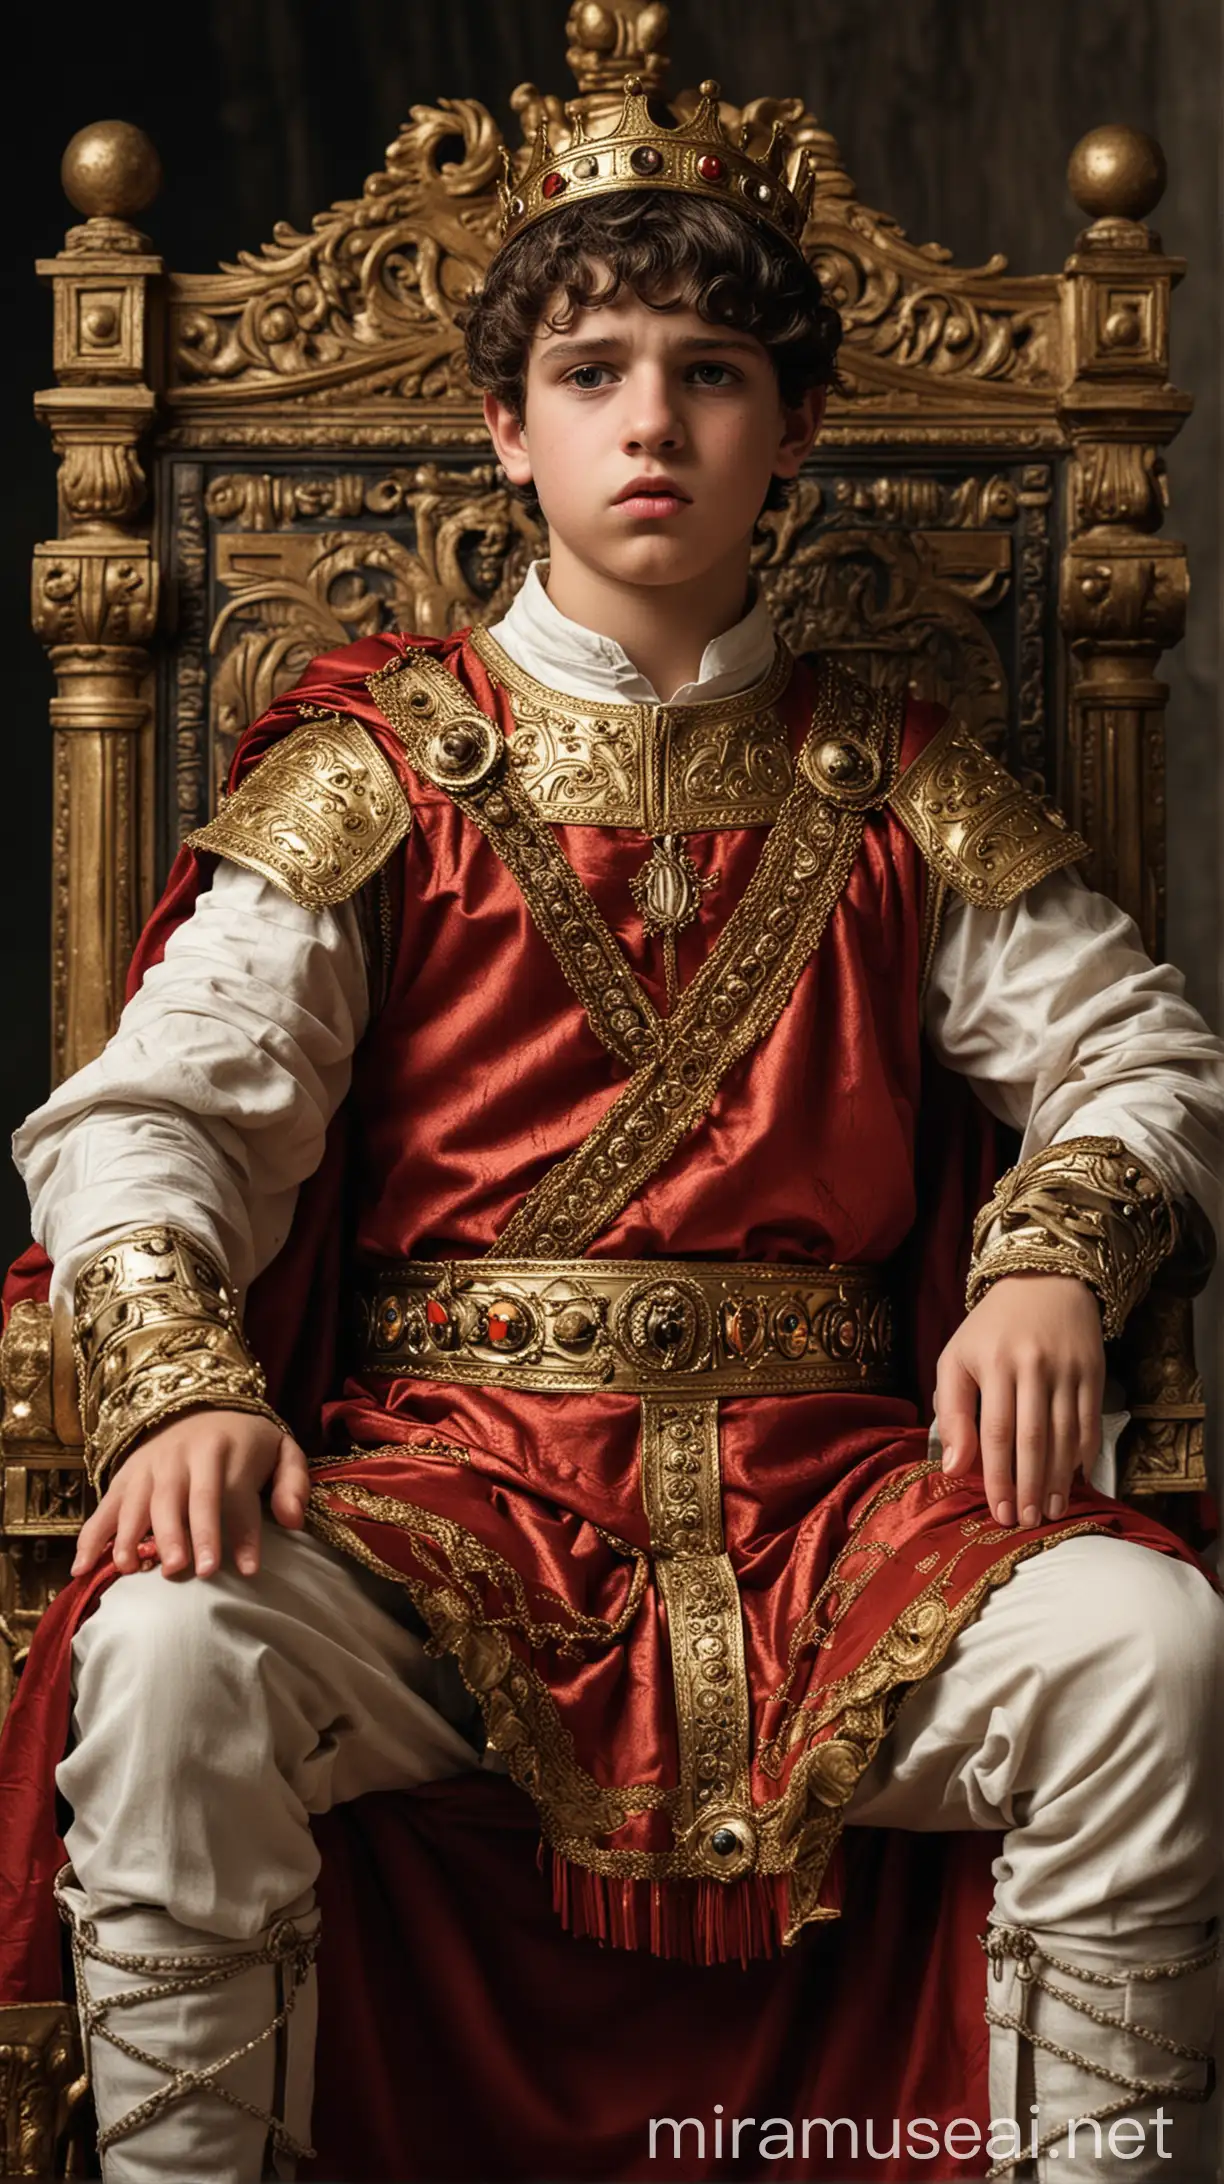 A 14-year-old Elagabalus wearing king suit , sitting on the throne, looking arrogant and powerful. hyper ealistic